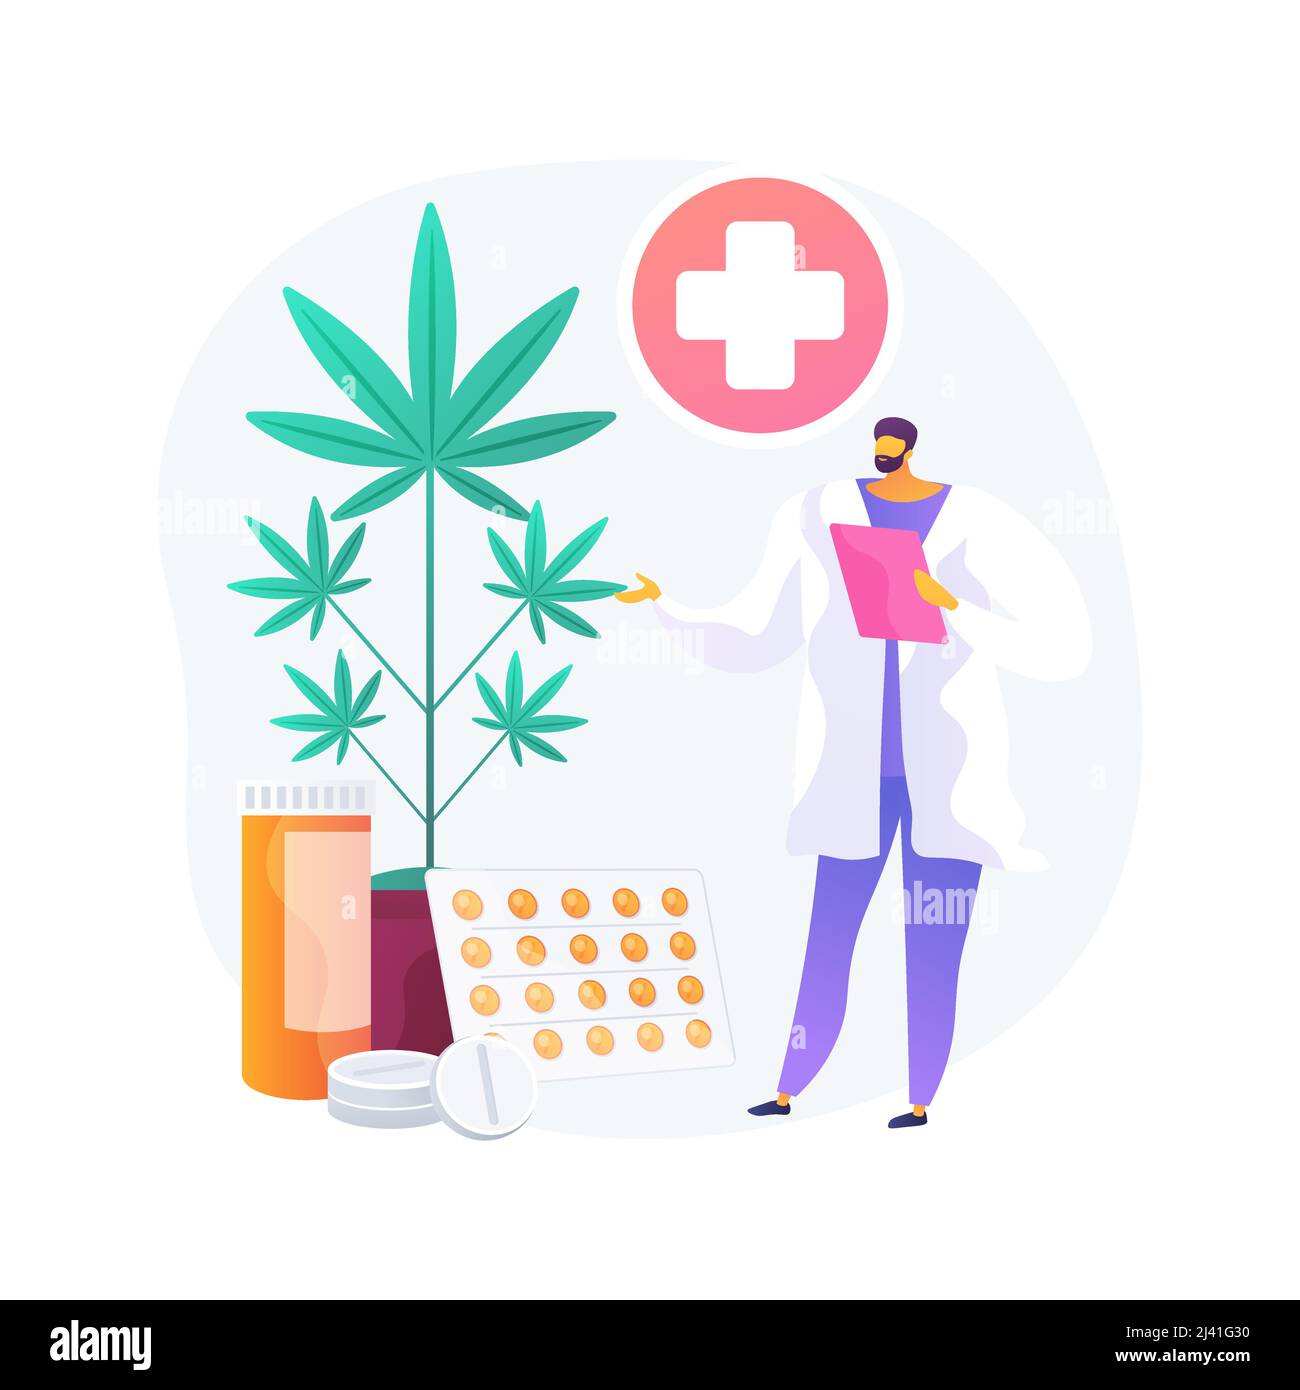 Medical marijuana abstract concept vector illustration. Medical cannabis, cannabinoids drugs, diseases and conditions treatment, cancer pain relief, h Stock Vector